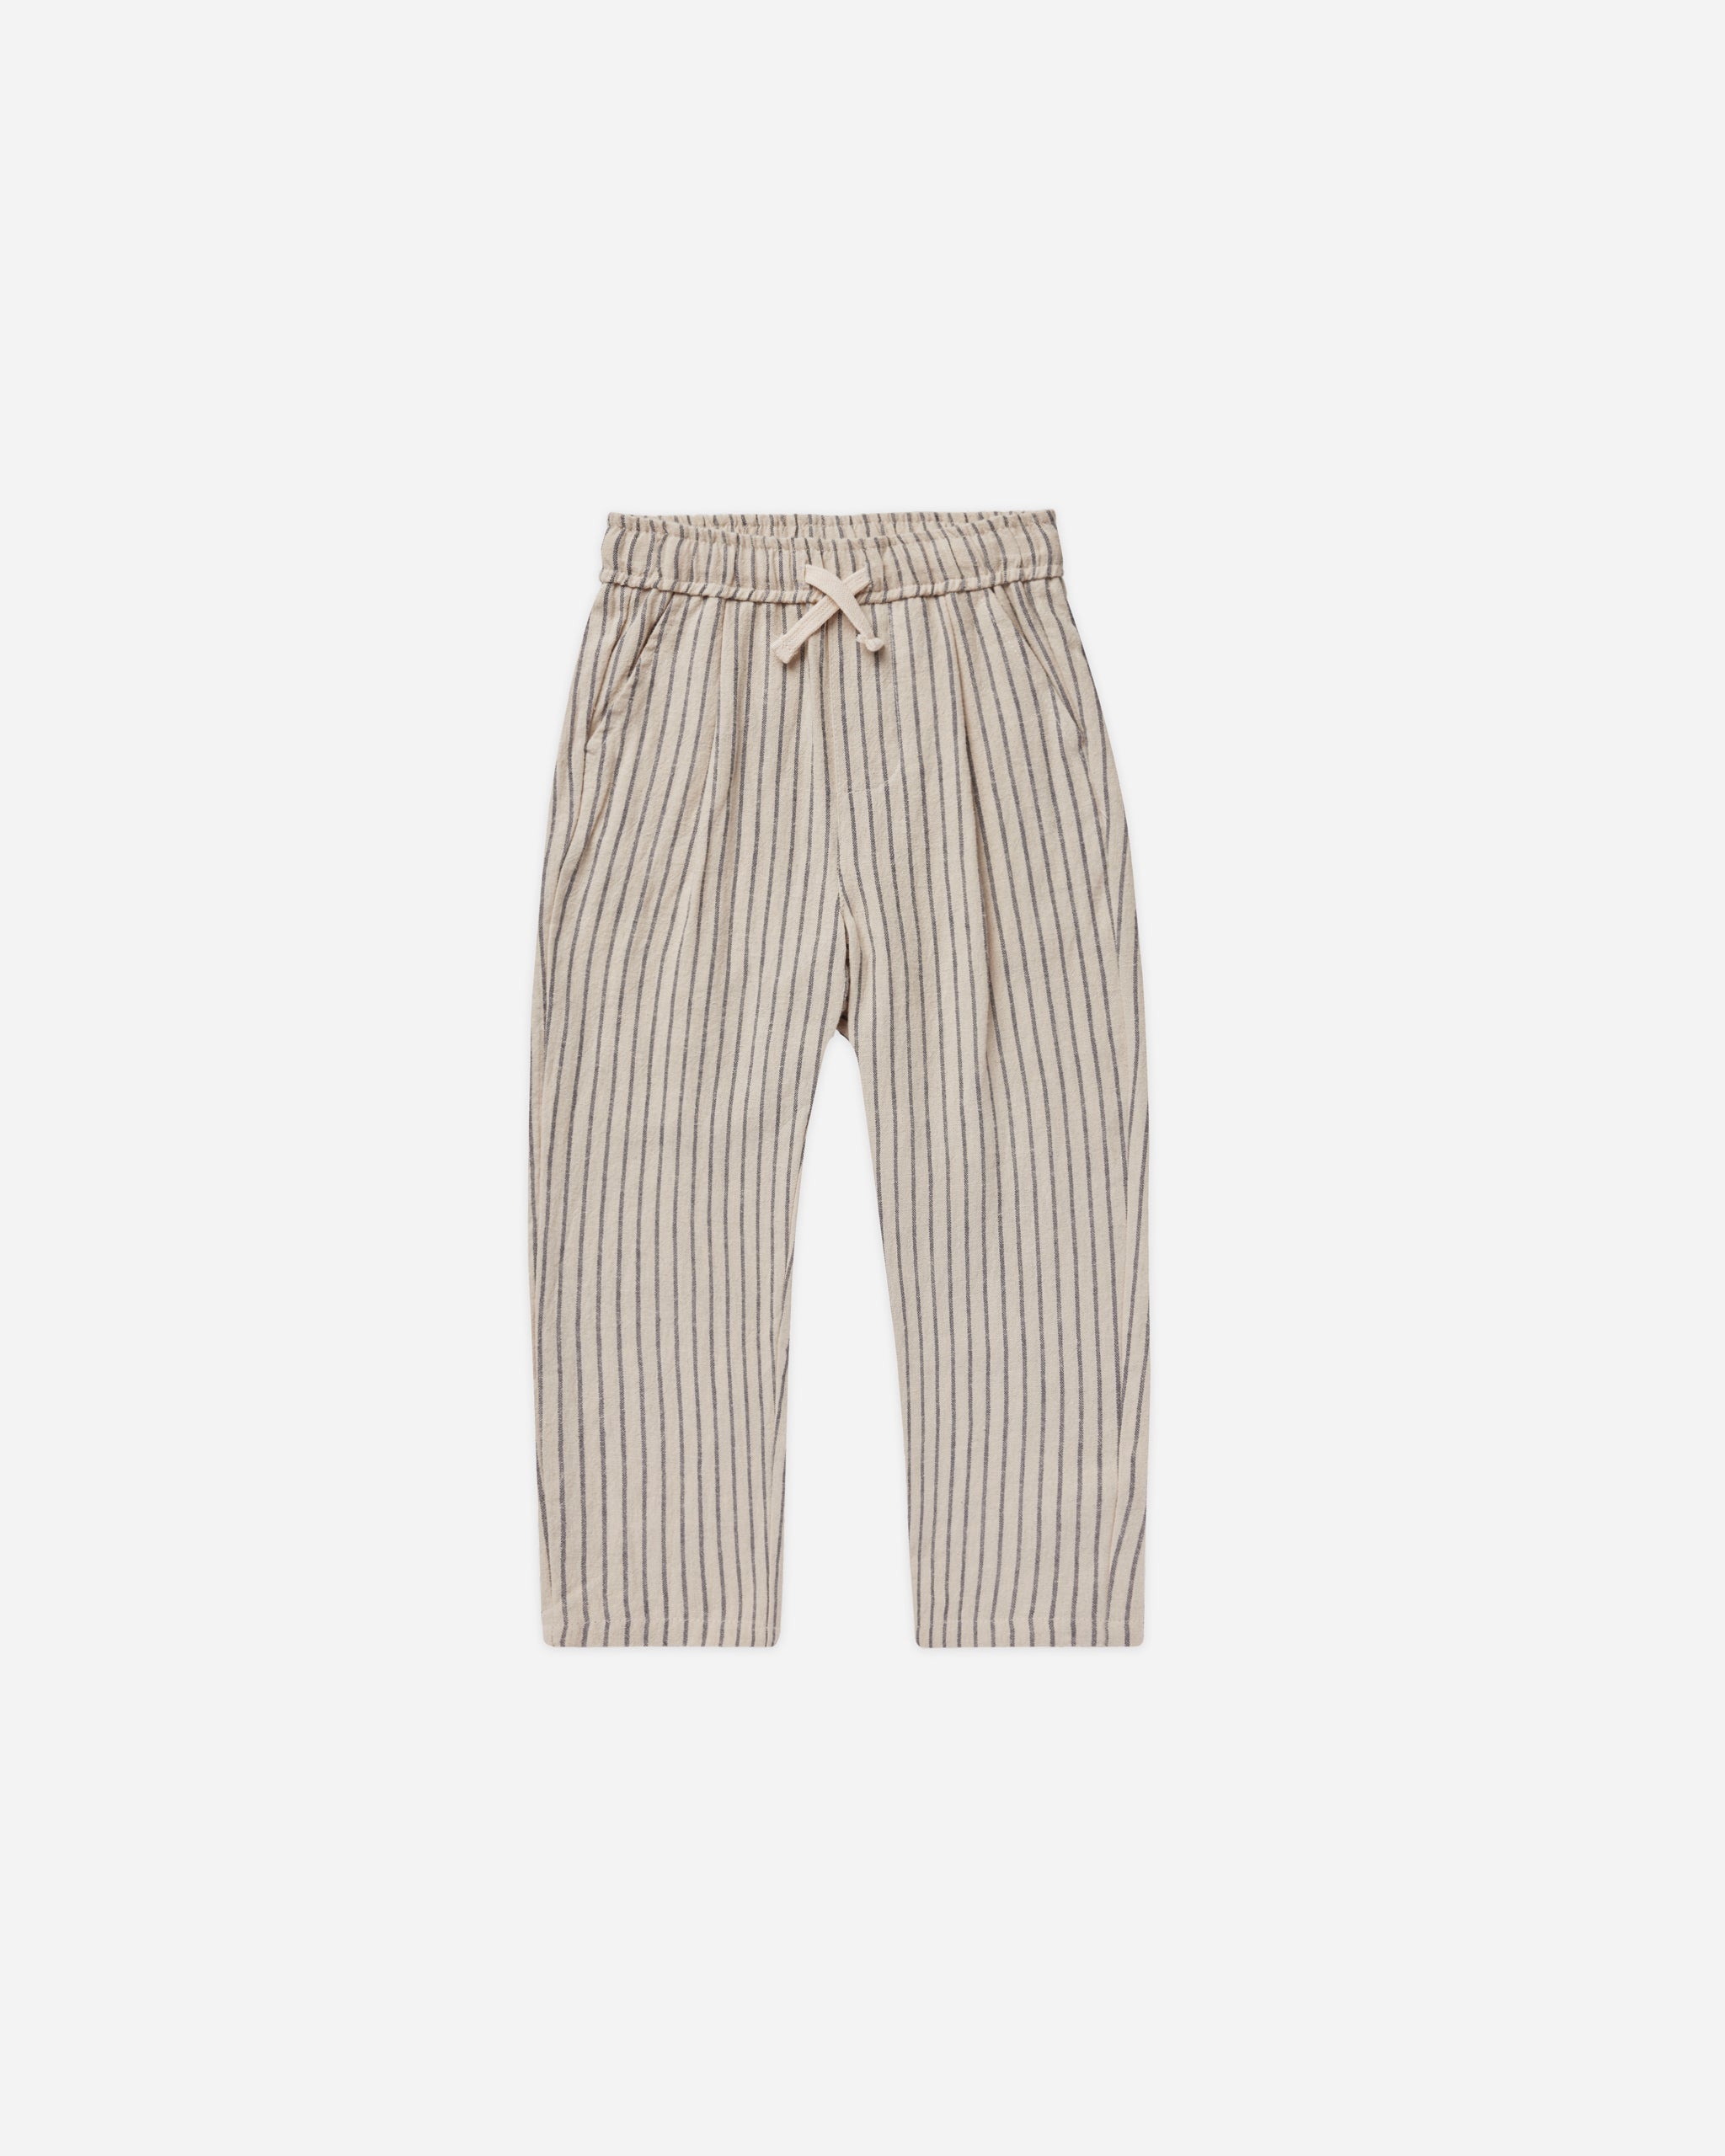 Ryder Pant || Slate Pinstripe - Rylee + Cru | Kids Clothes | Trendy Baby Clothes | Modern Infant Outfits |